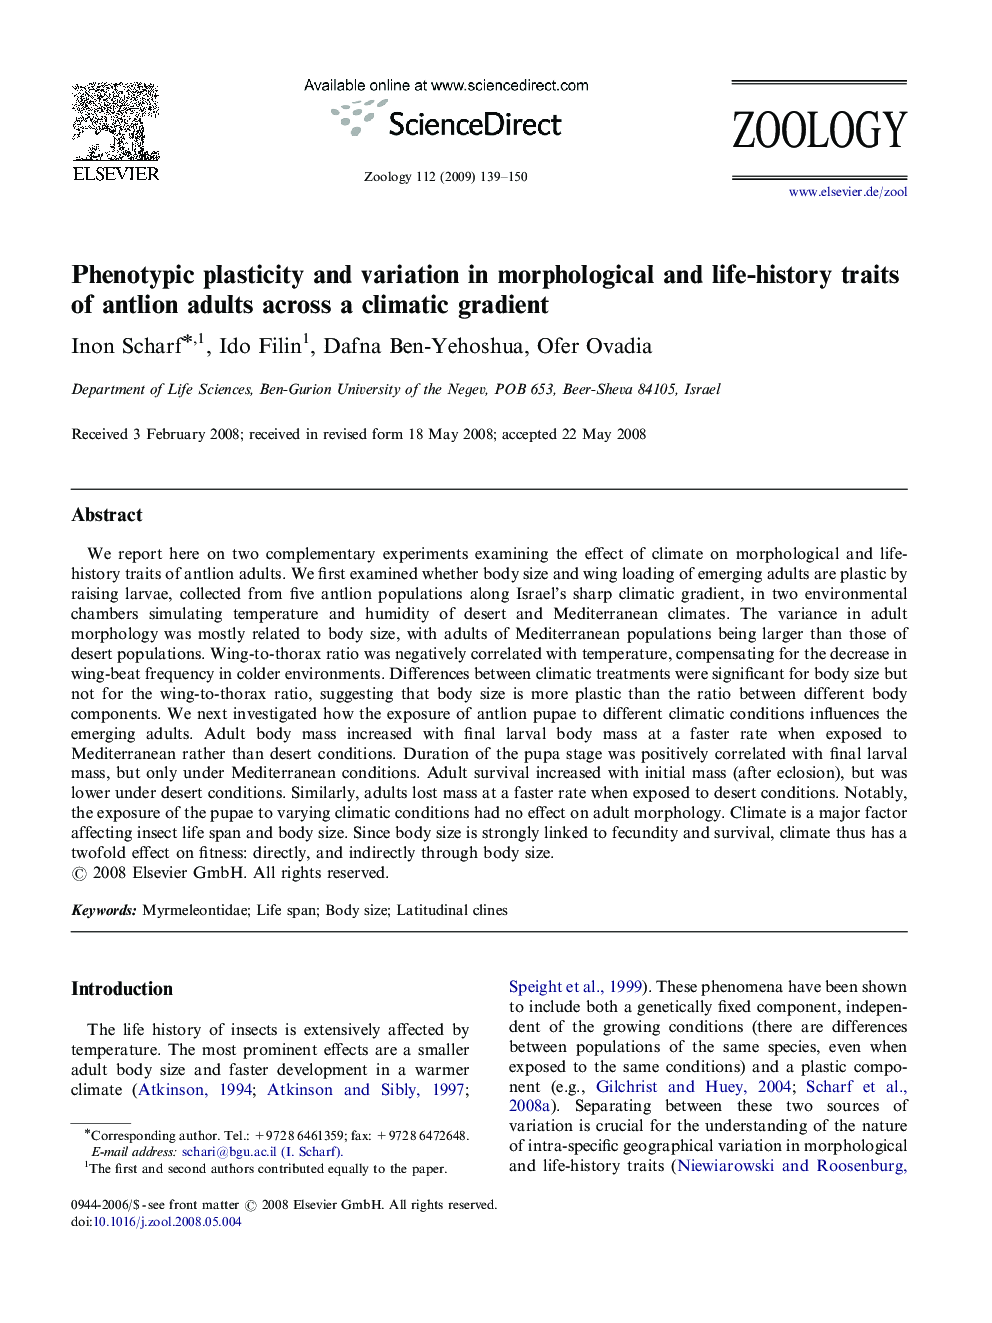 Phenotypic plasticity and variation in morphological and life-history traits of antlion adults across a climatic gradient